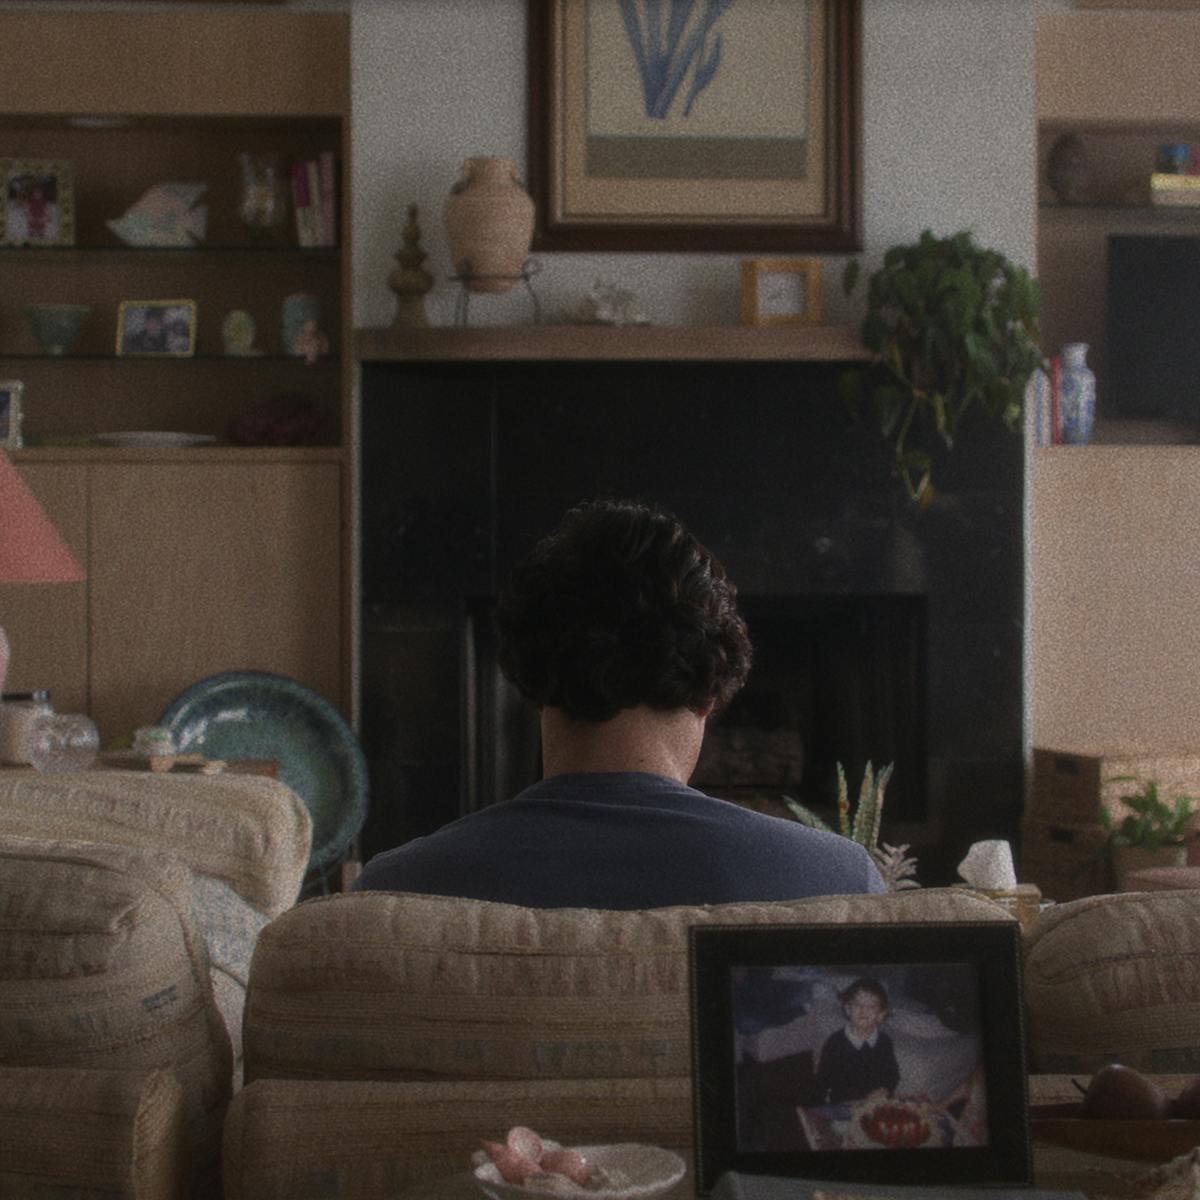 Joe (Charles Melton) sits on the living room couch reading in front of a dark TV screen.